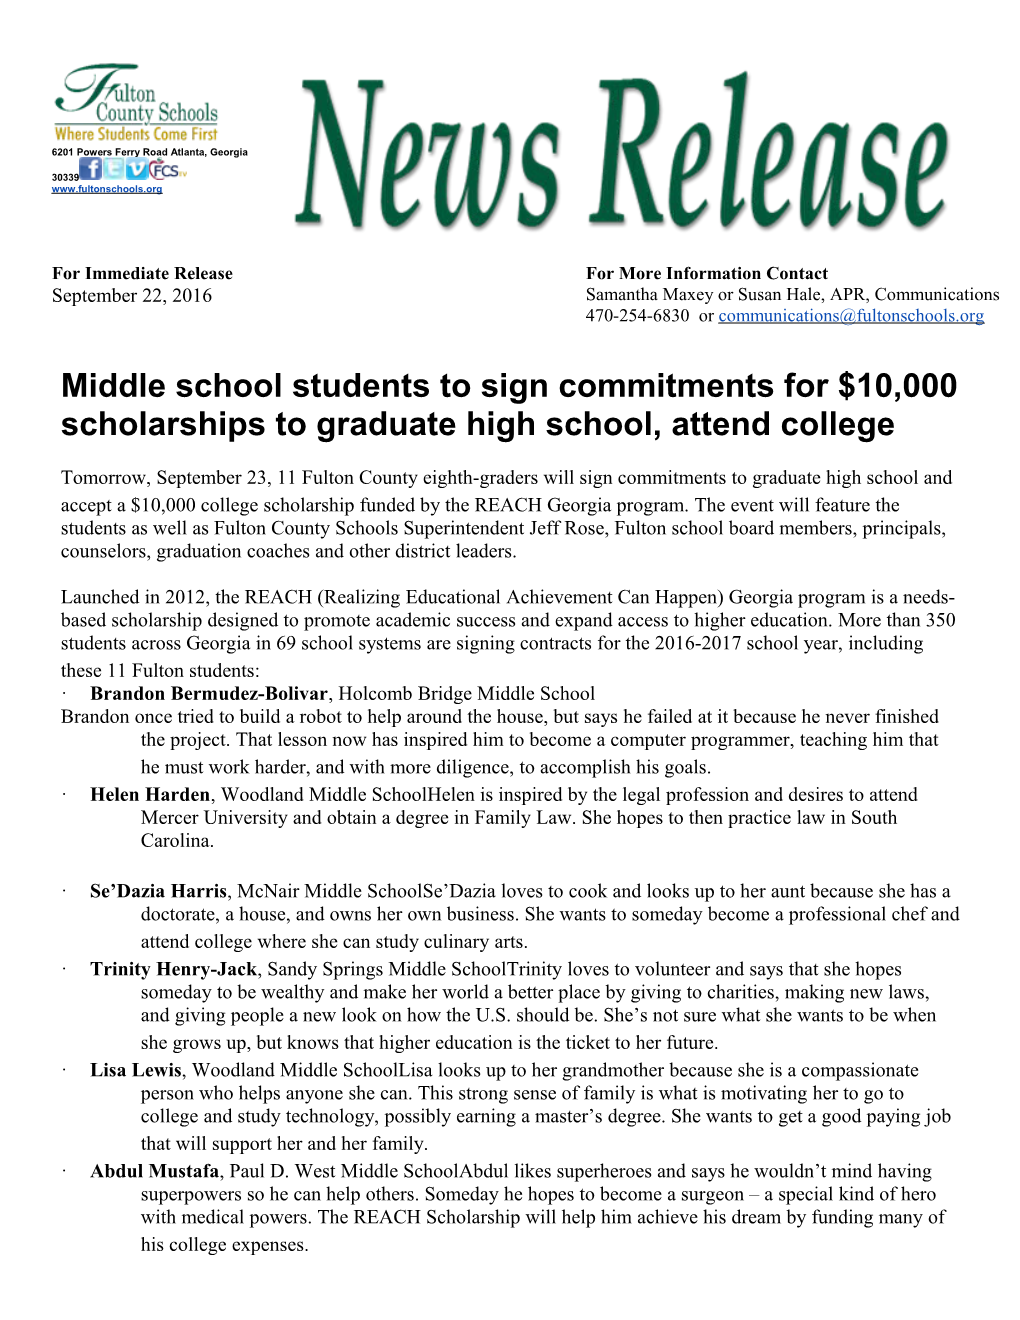 Middle School Students to Sign Commitments for $10,000 Scholarships to Graduate High School